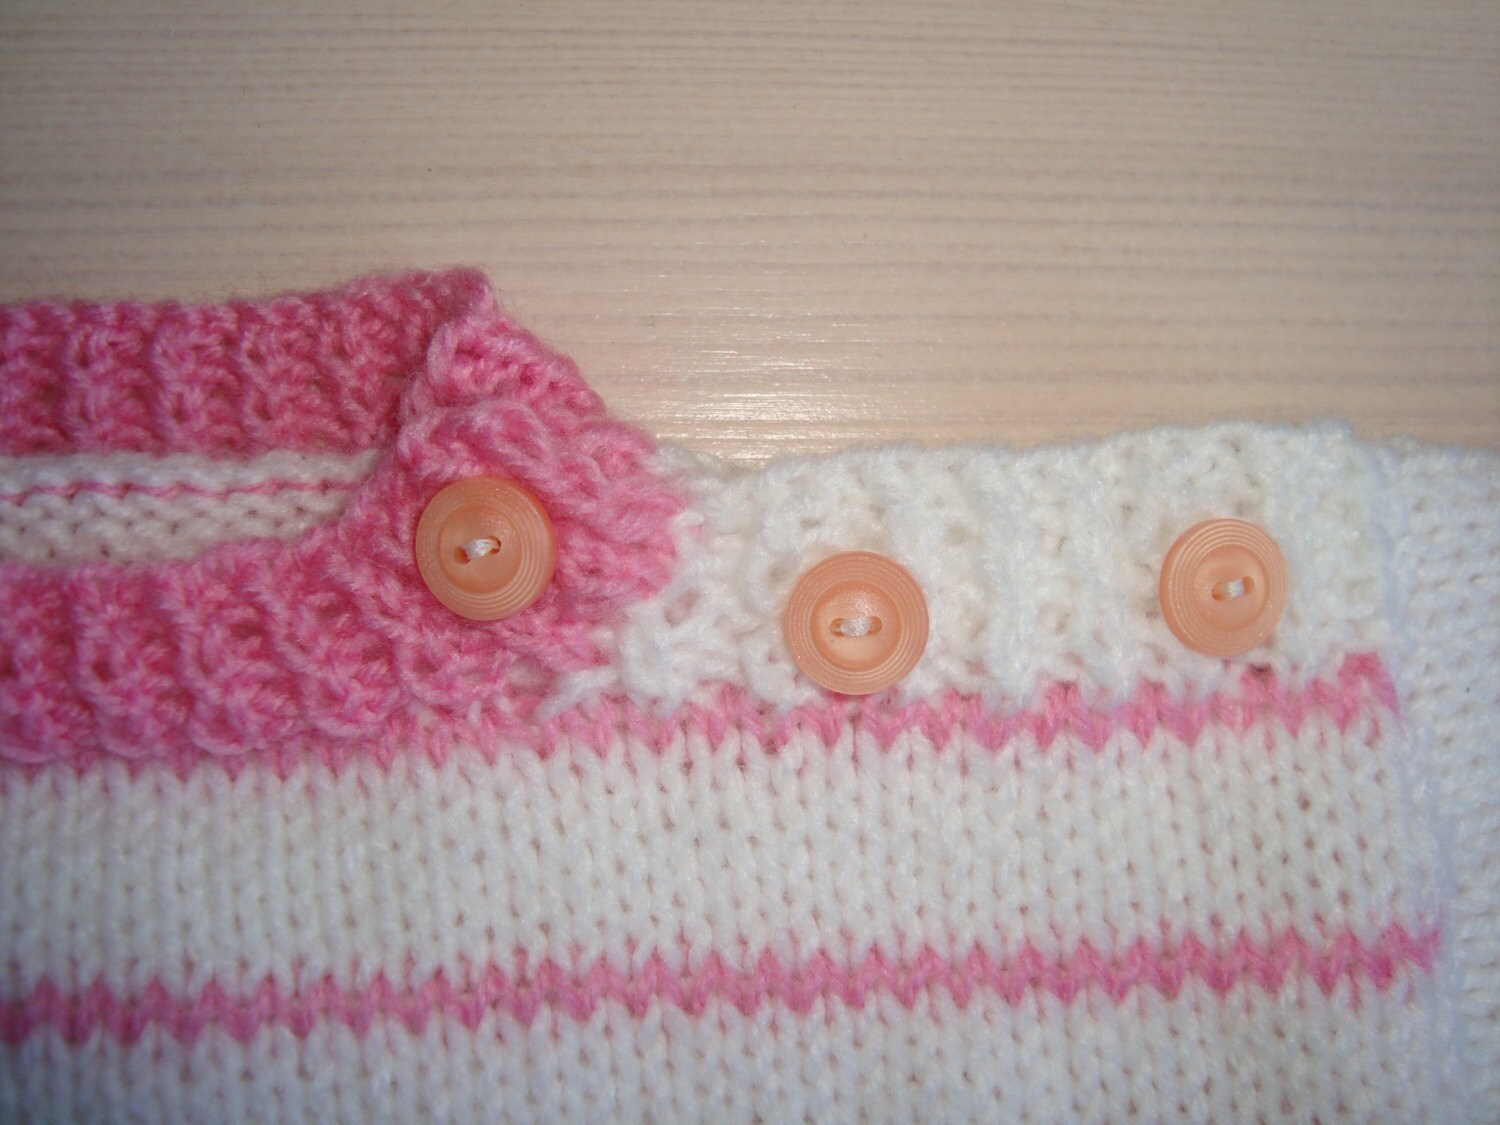 Handknitted Babysweater Pink and White With Flowers - Etsy